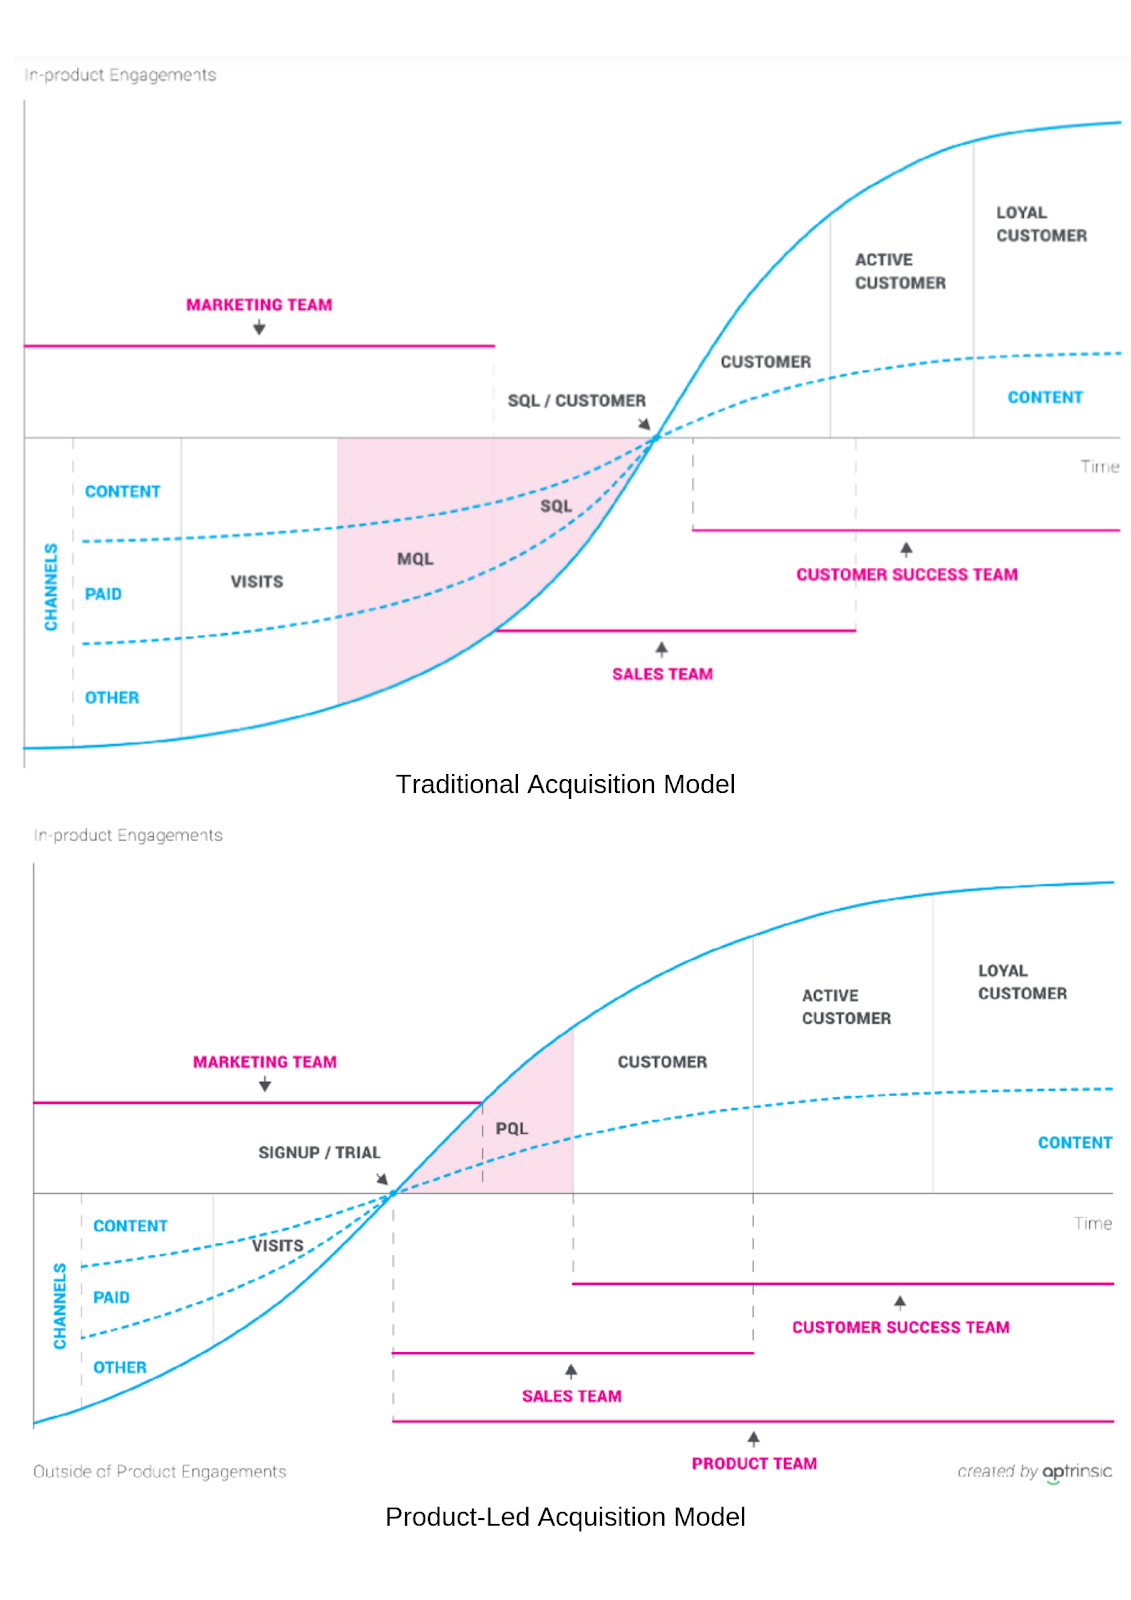 traditional versus product-led acquisition model.